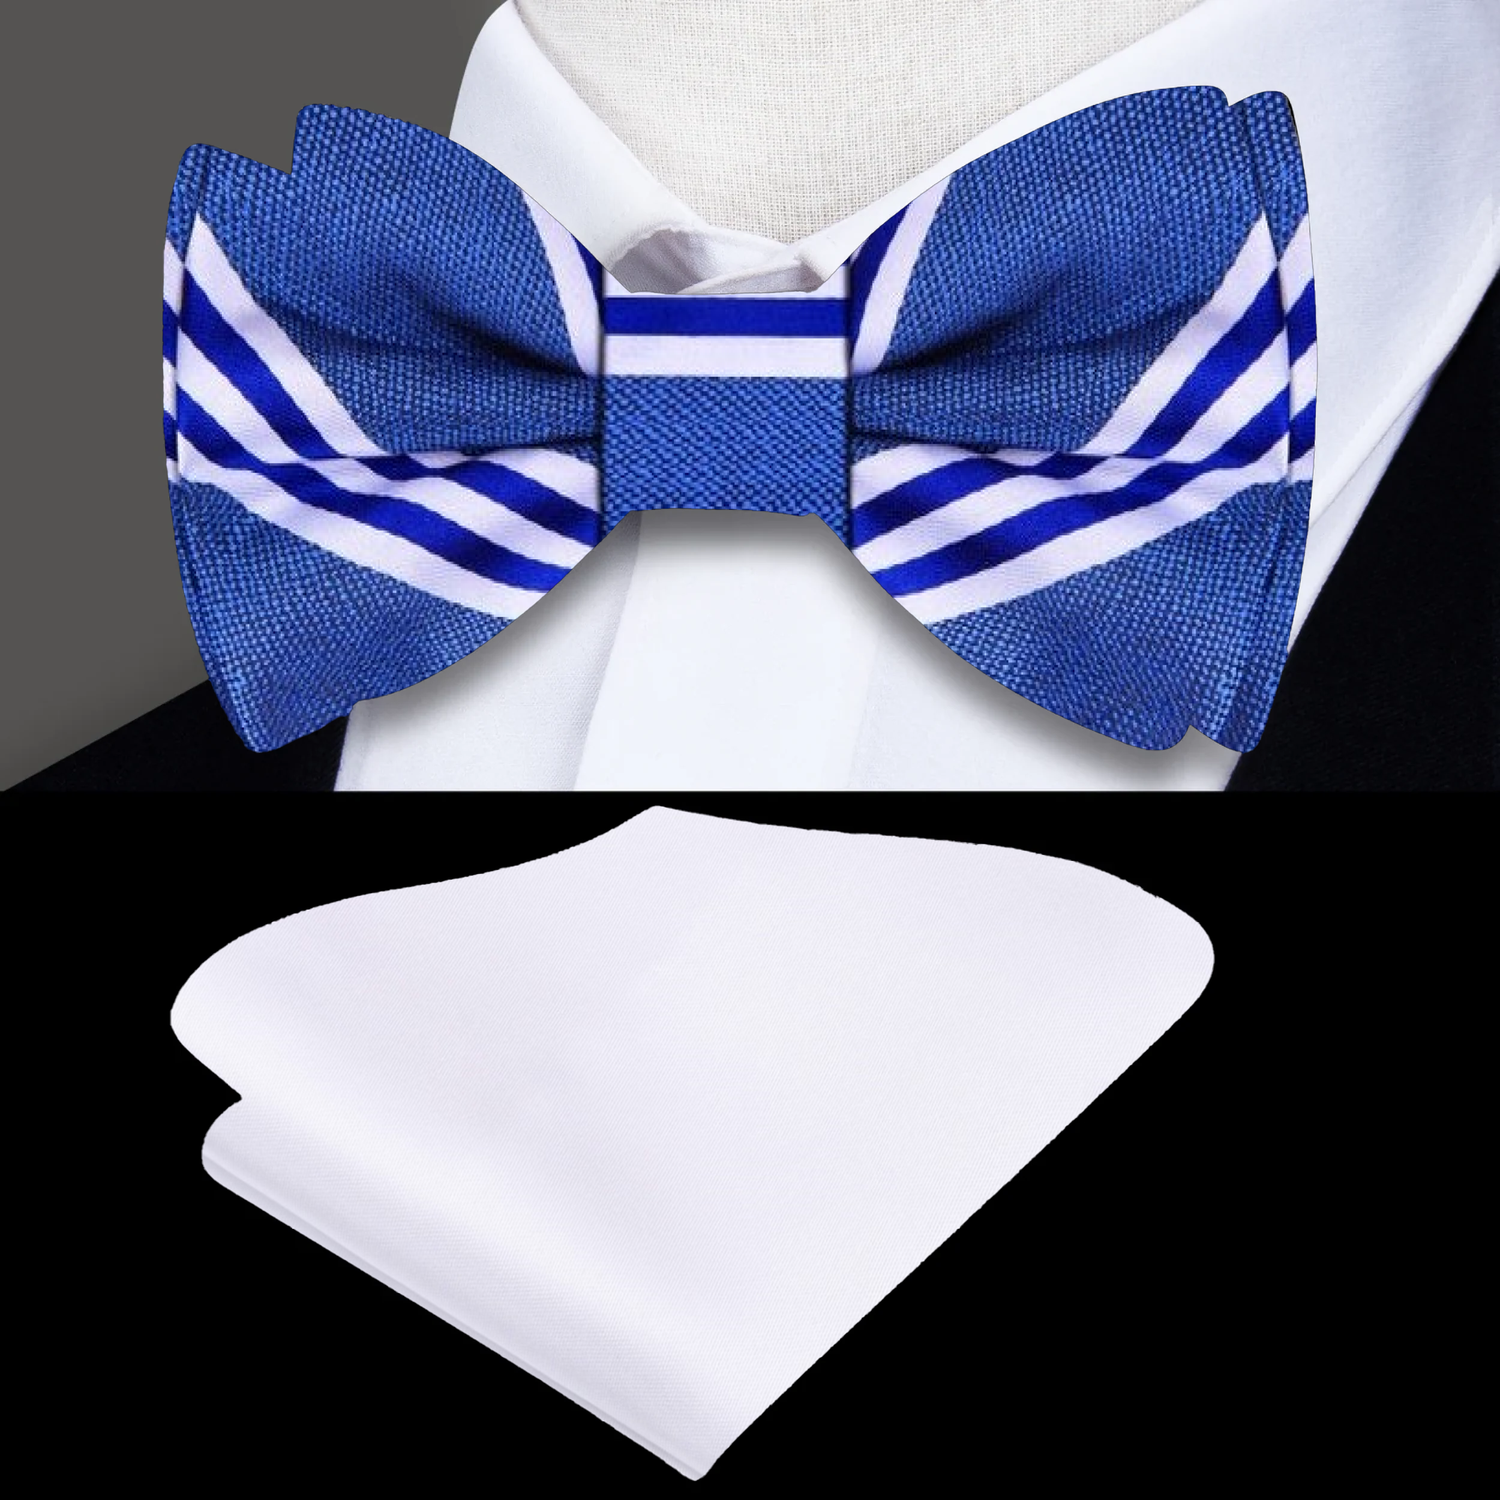 Blue and White Stripe Bow Tie and White Pocket SquareBlue and White Stripe Bow Tie and White Pocket Square